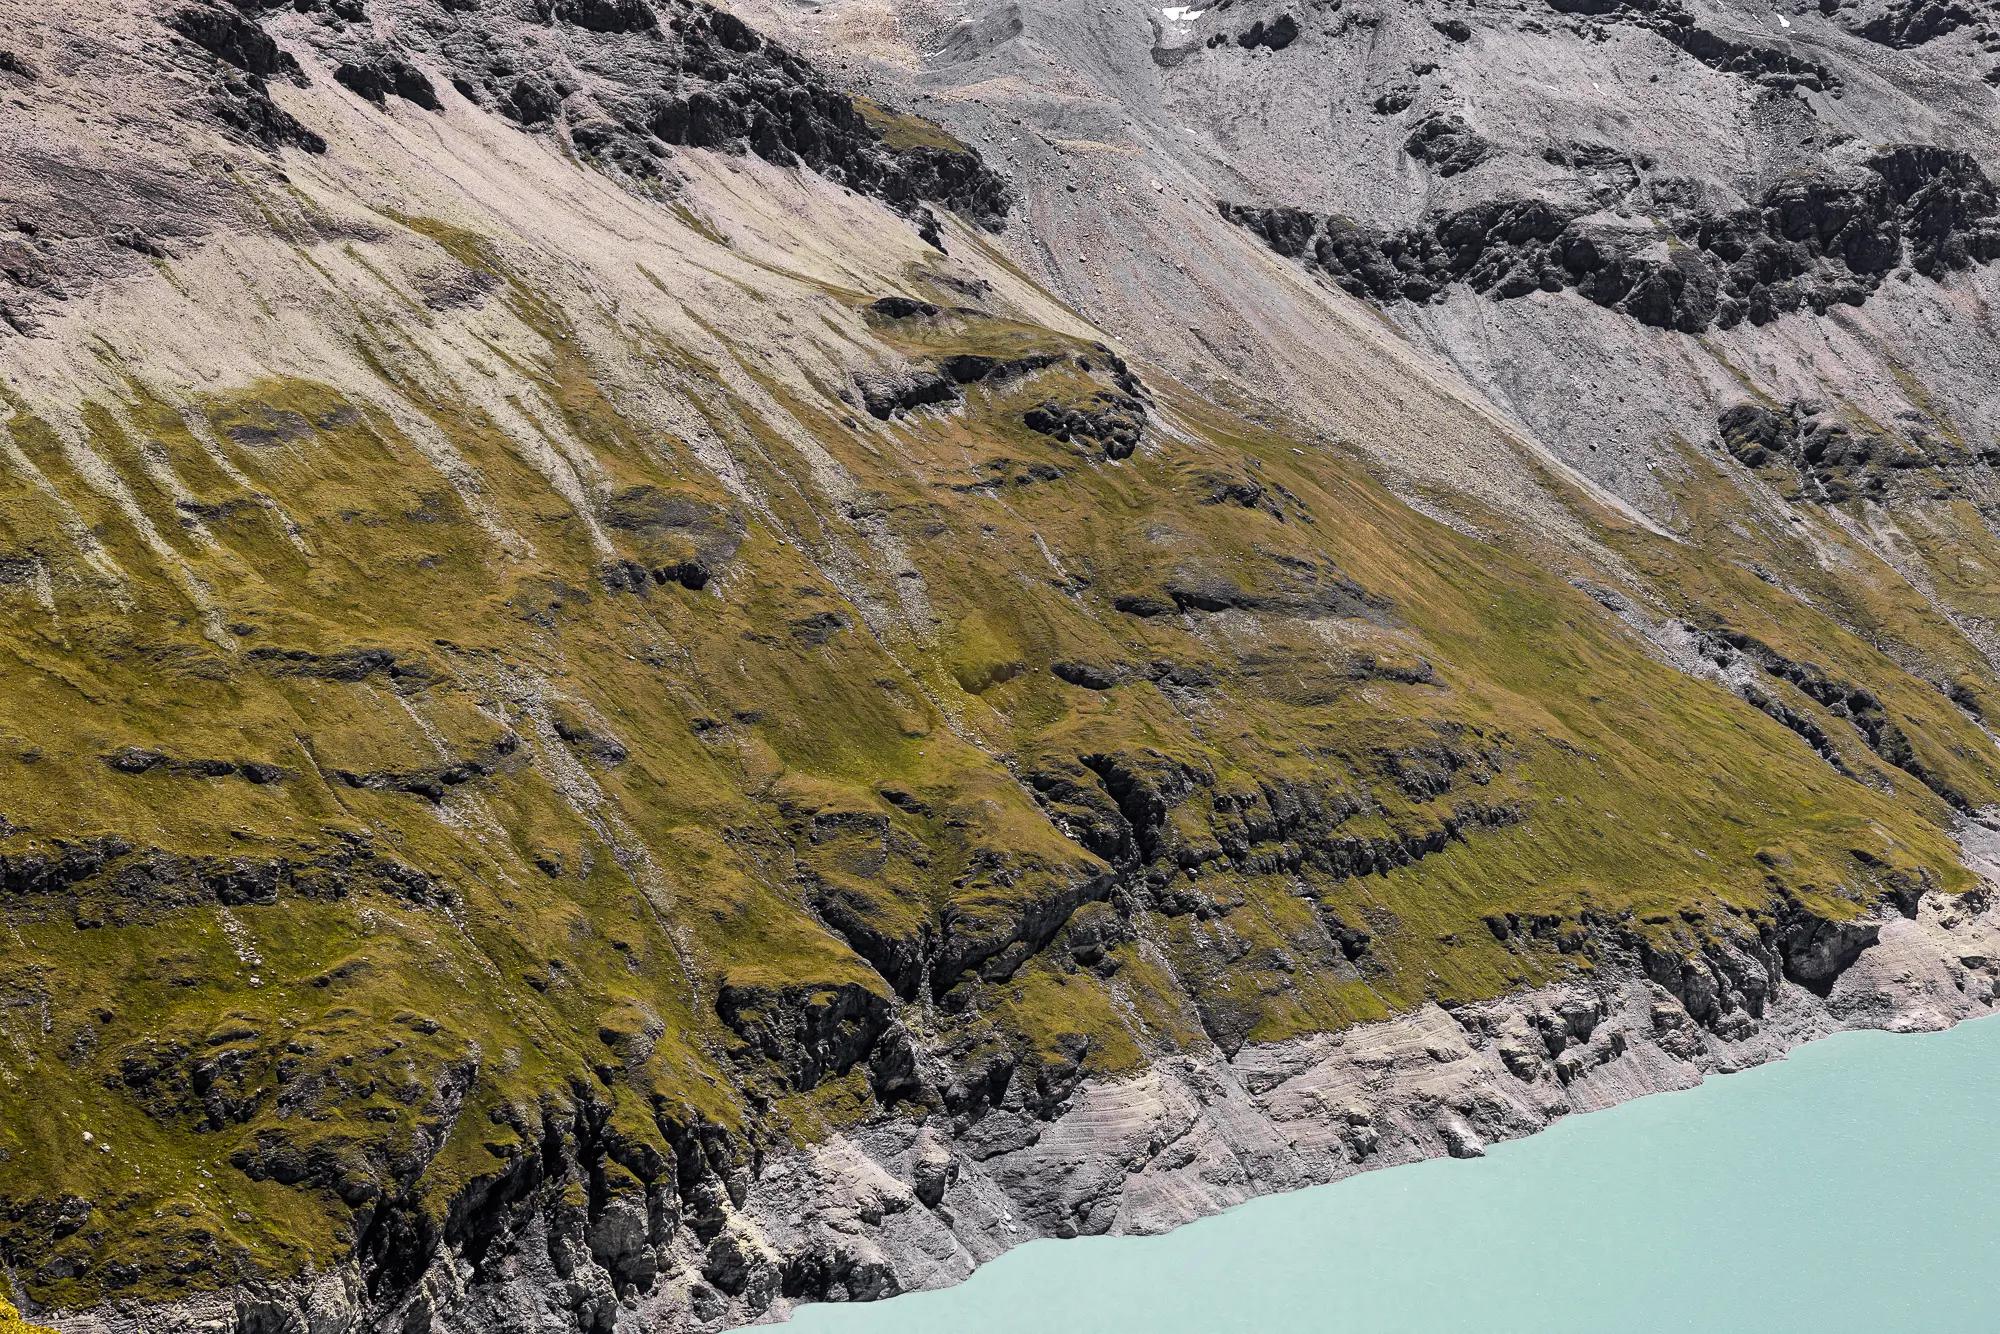 Many alpine slopes are largely held together by permafrost. Thawing will inevitably lead to an increase in landslides.